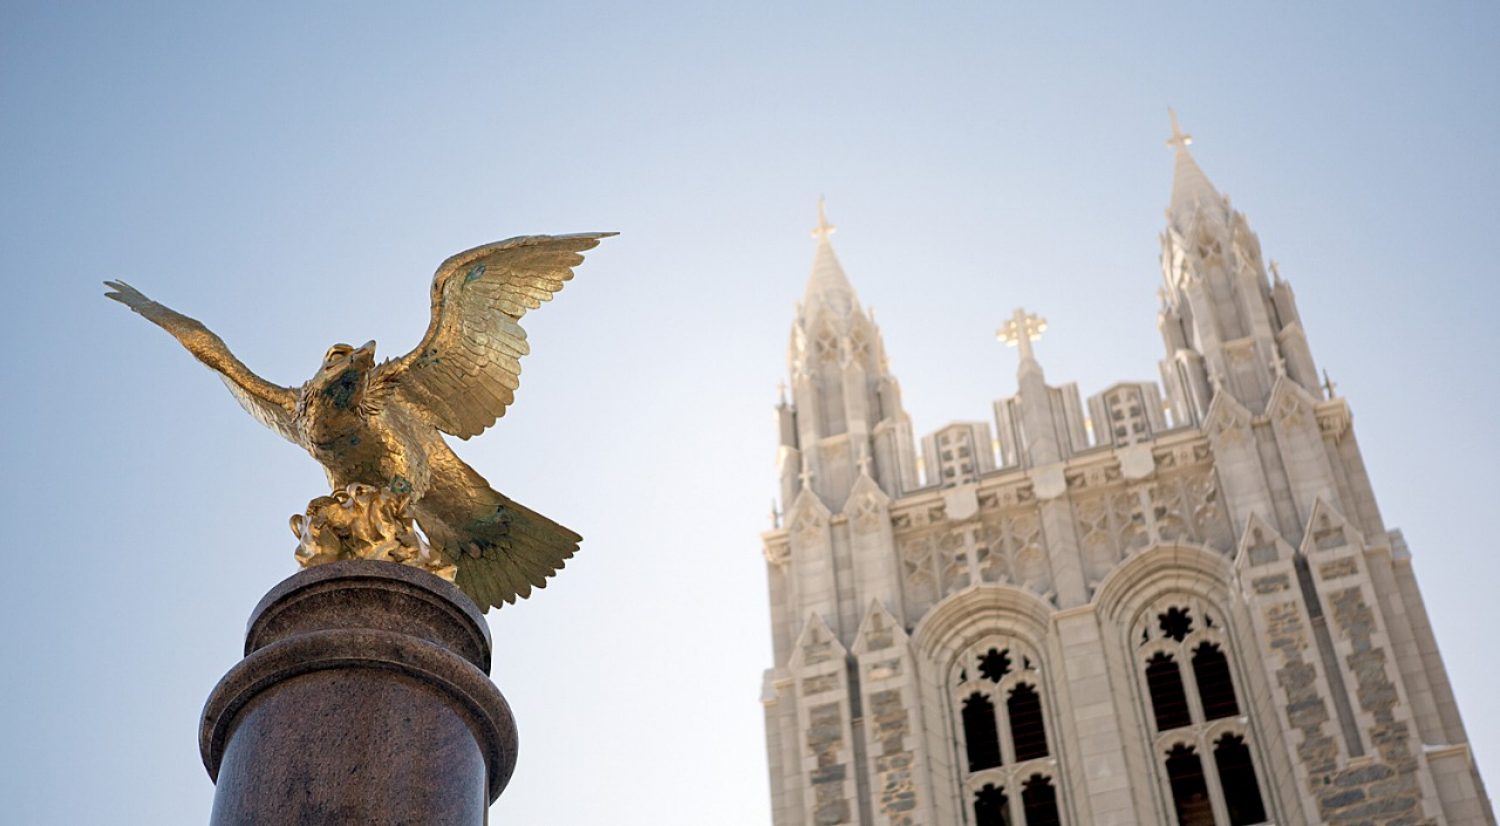 Gasson tower and eagle statue at Boston College